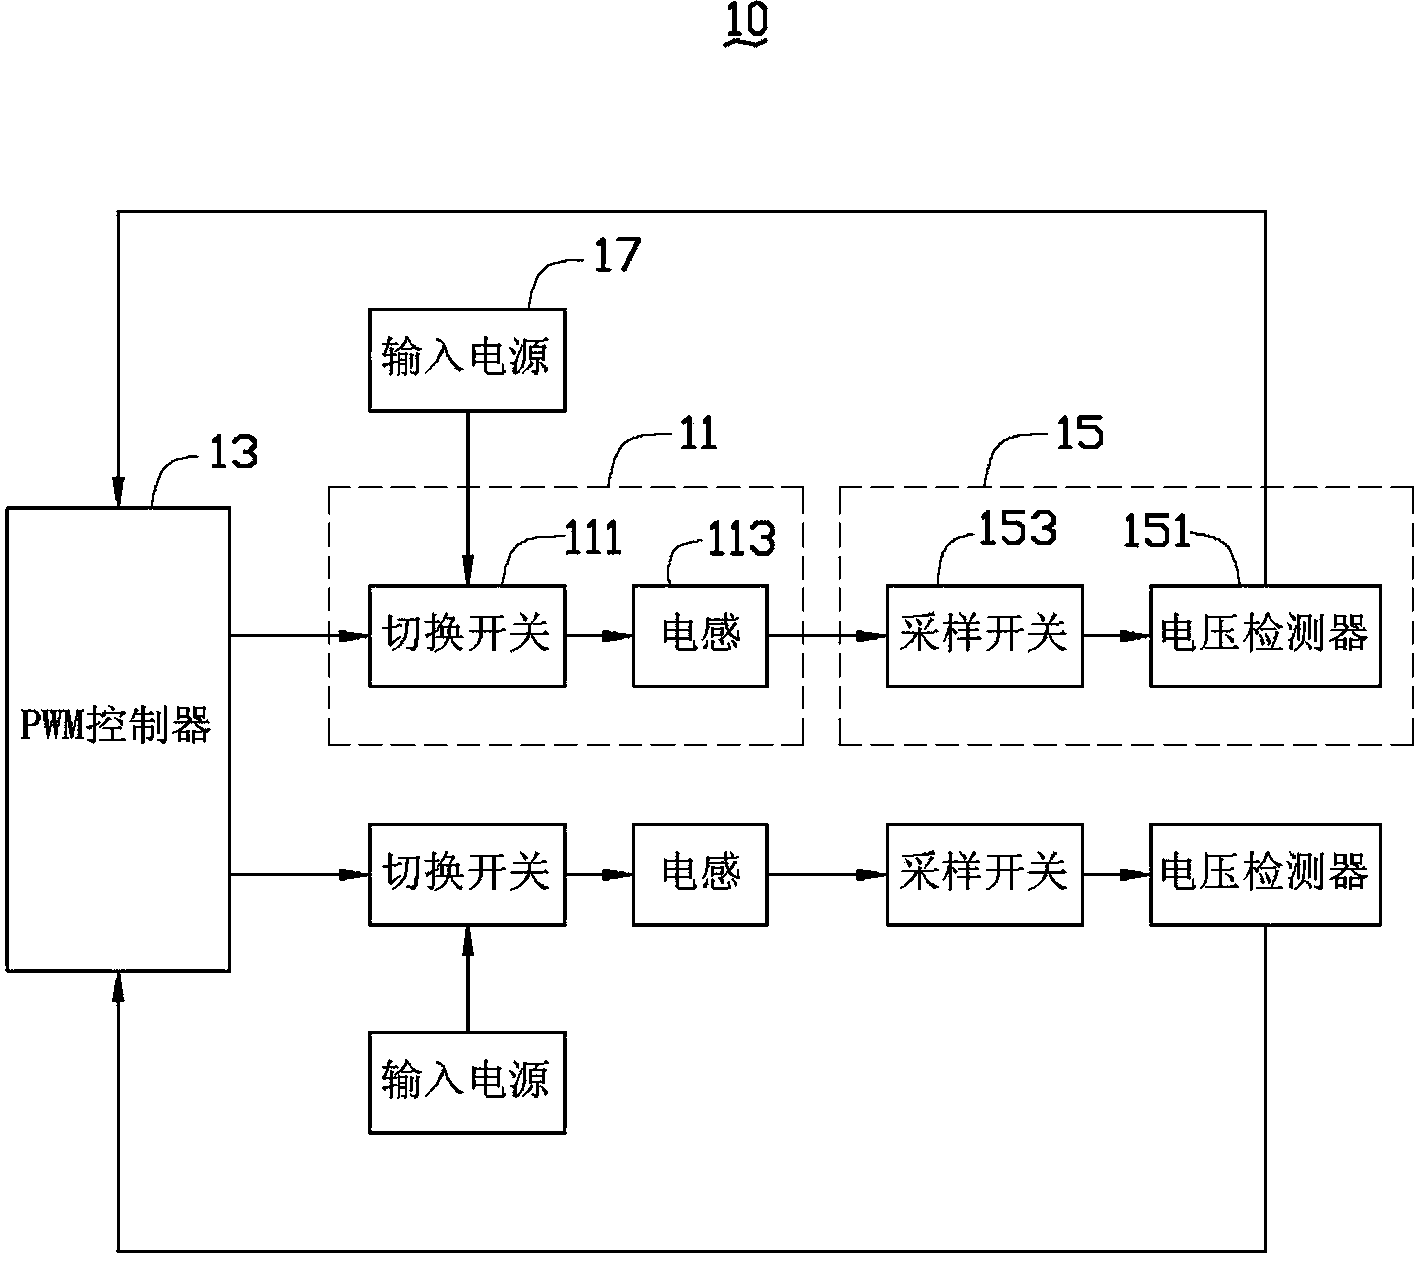 Polyphase type voltage conversion system